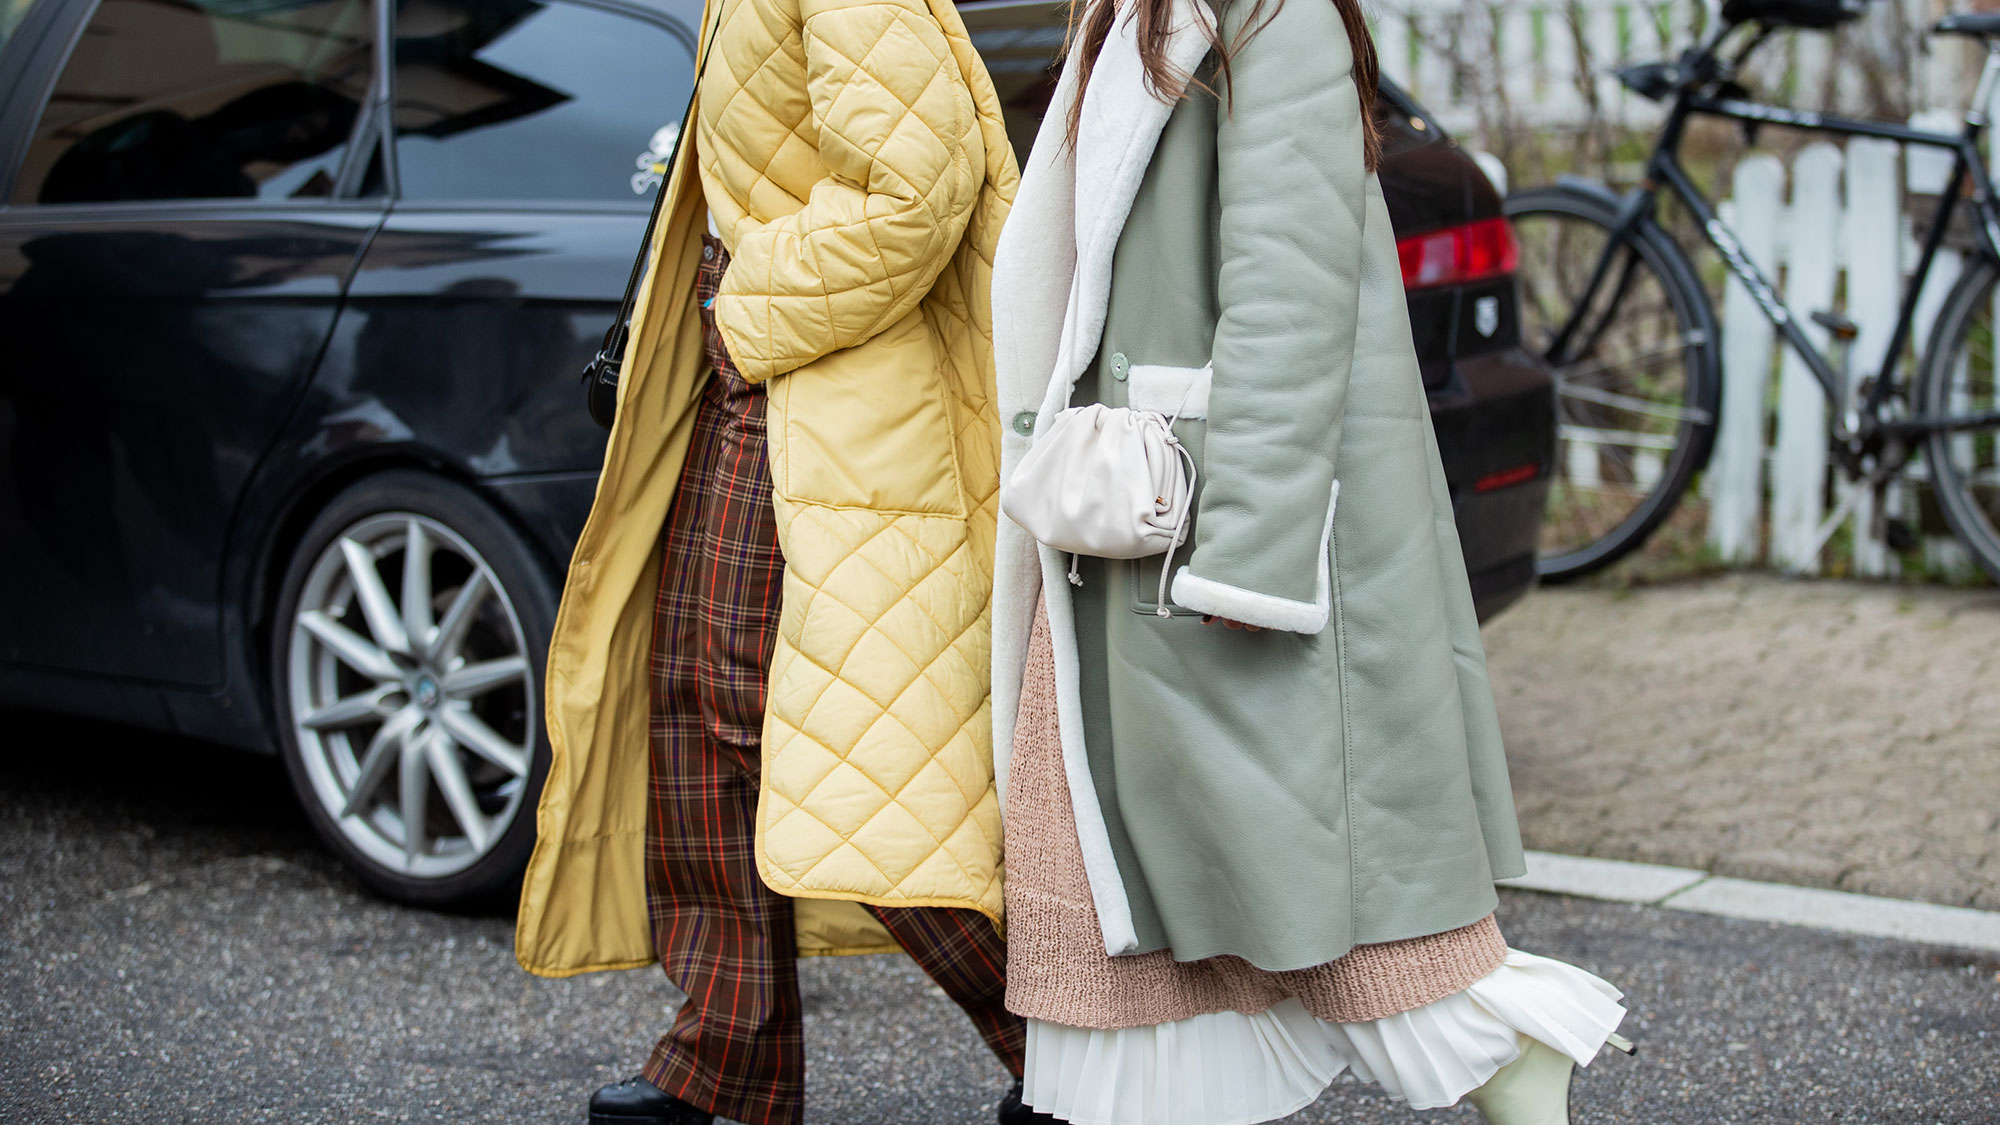 These duvet coats are the only way to deal with the snow